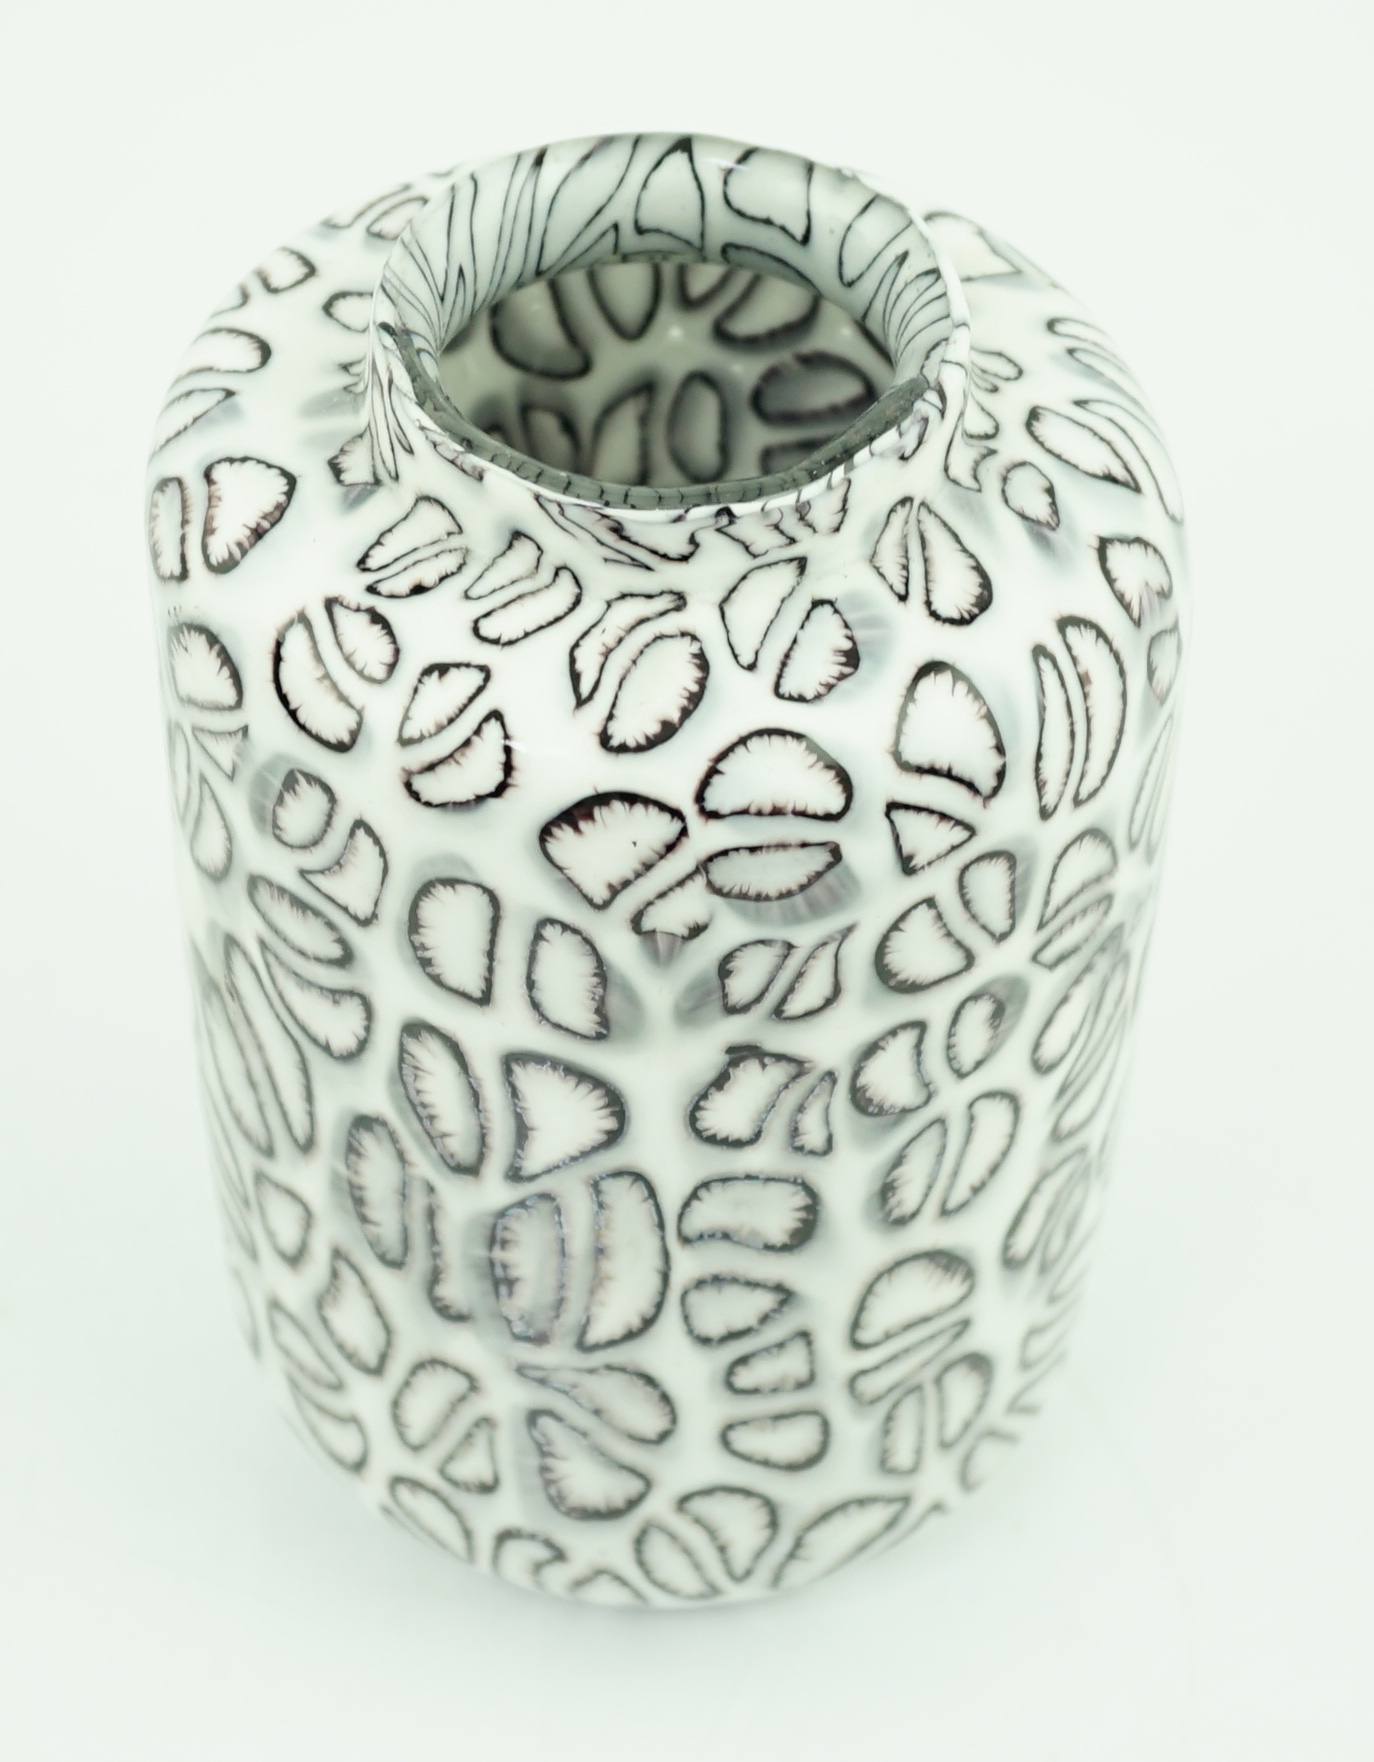 Vittorio Ferro (1932-2012) A Murano glass Murrine vase, with black segments on a white ground, signed, 17cm, Please note this lot attracts an additional import tax of 20% on the hammer price